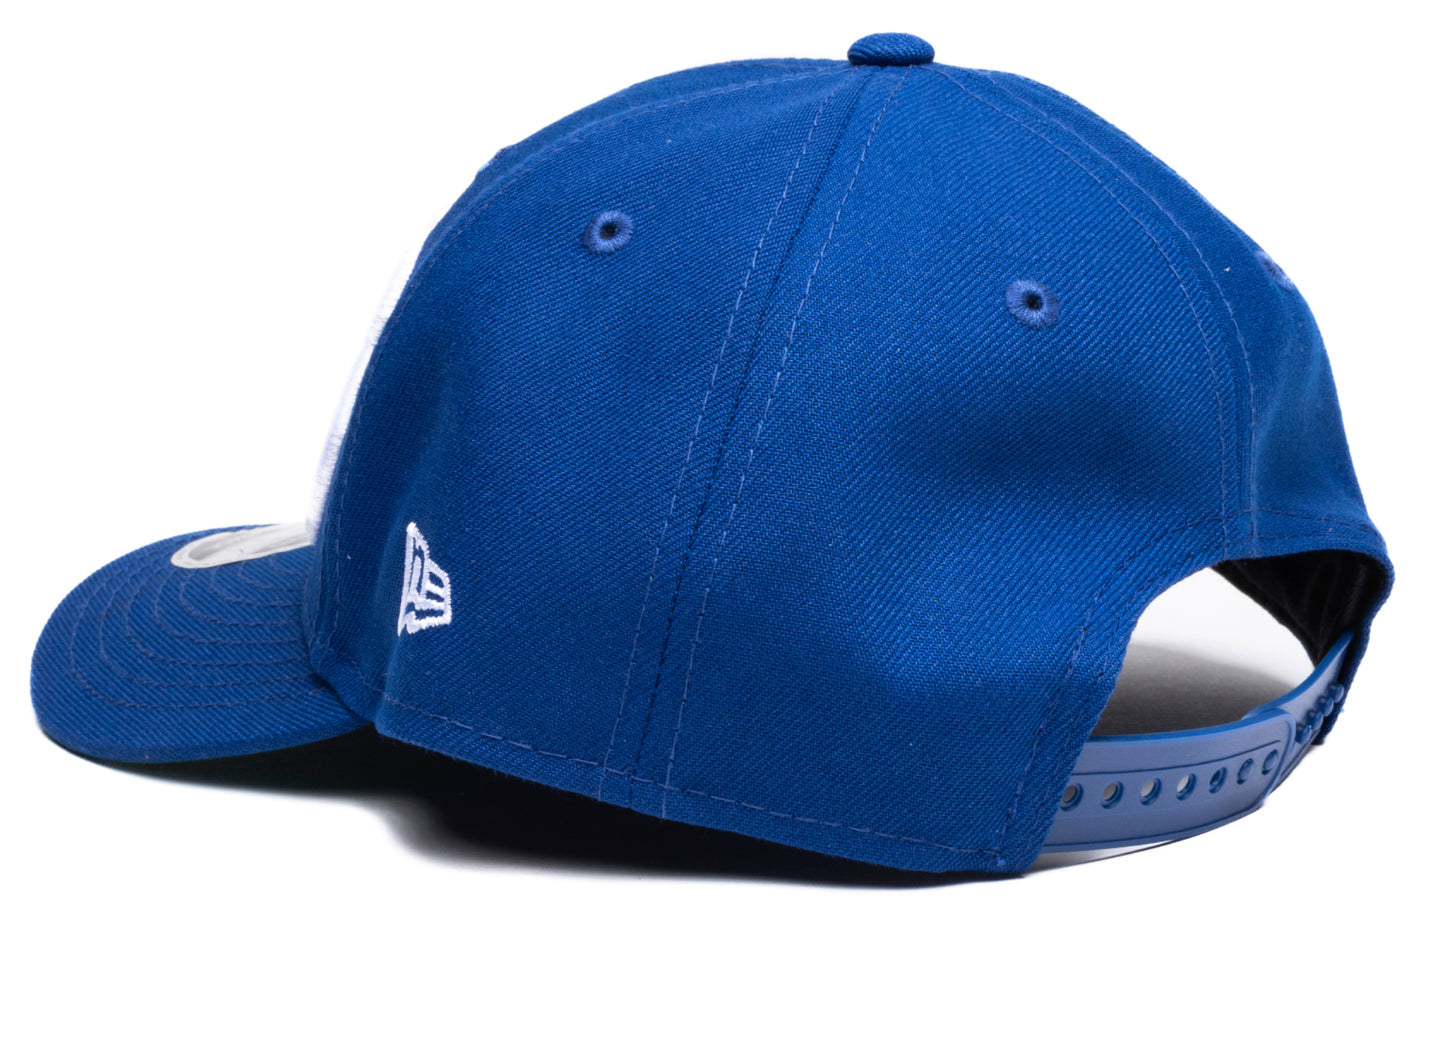 Oneness x New Era Snapback CATS Hat in Royal Blue/White